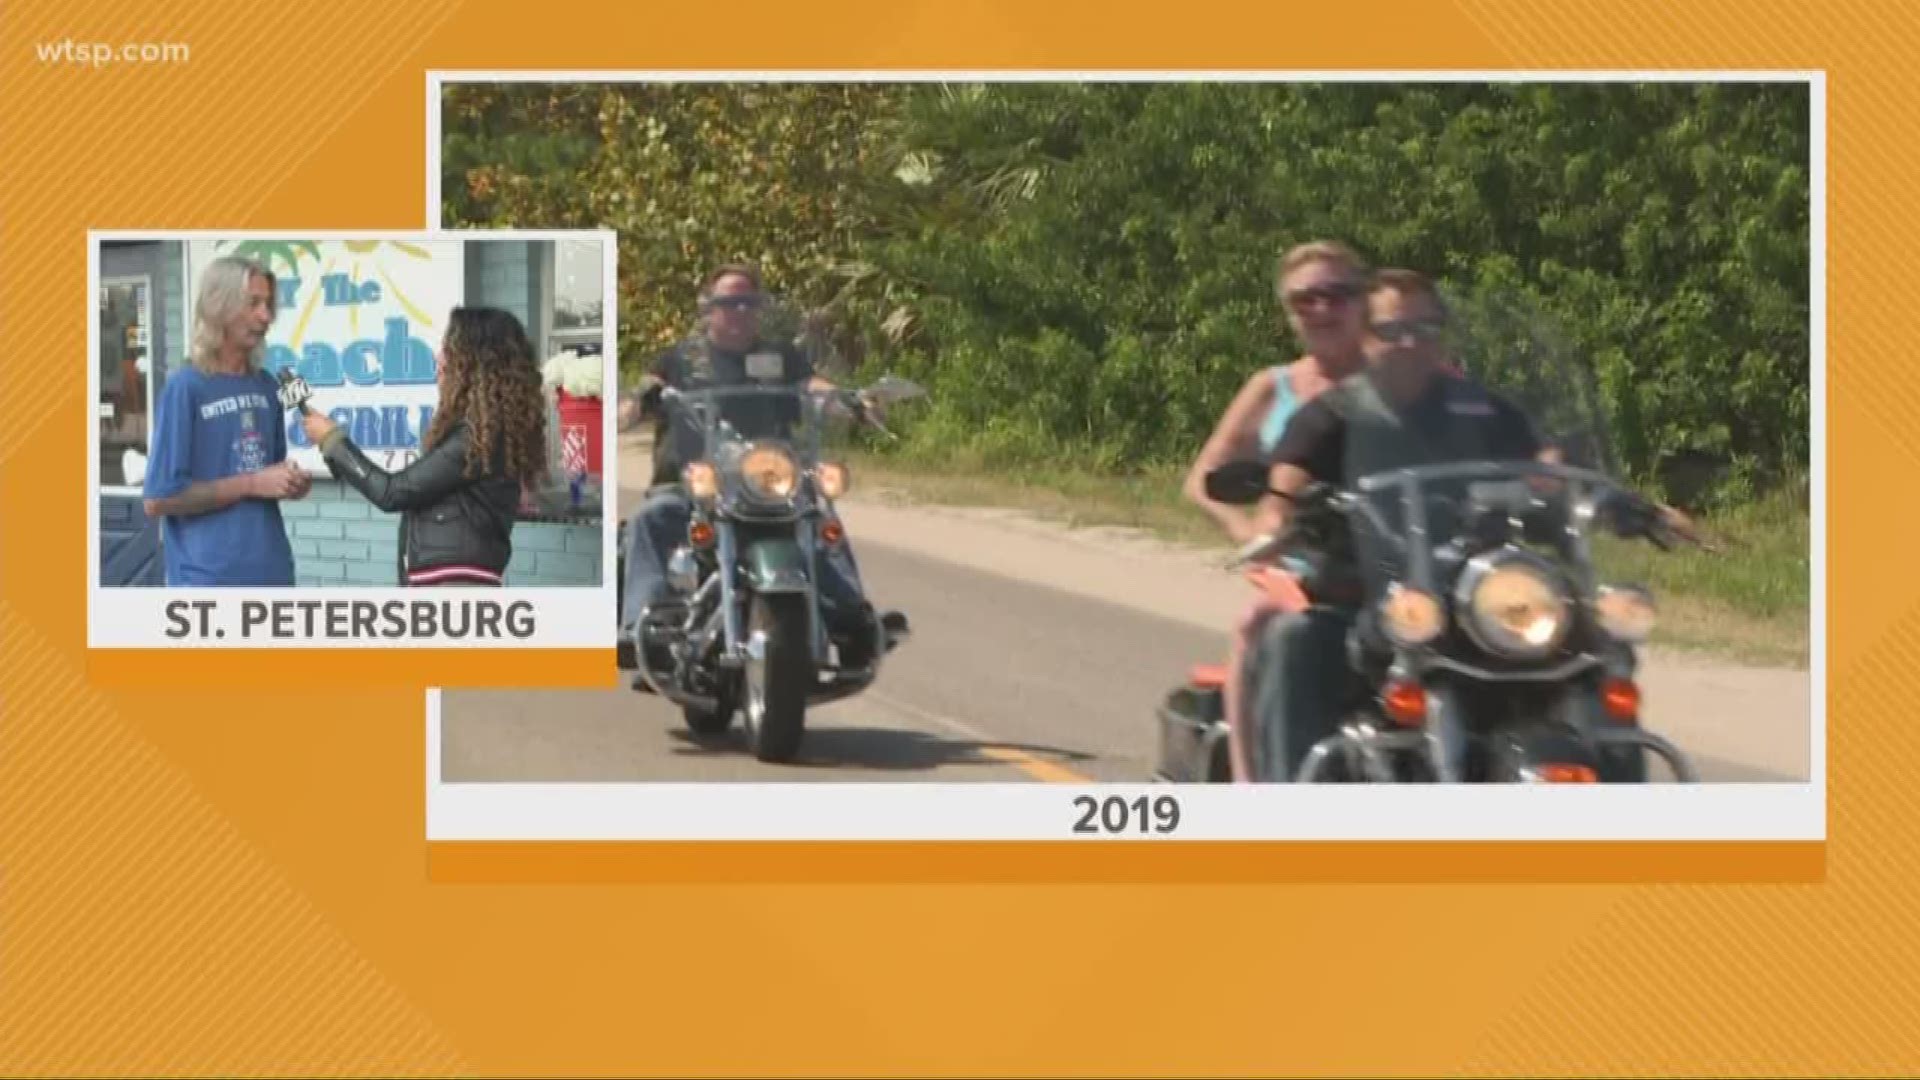 People are riding to remember Phoebe Jonchuck and raise money in her honor. Her father was convicted last year of killing her.